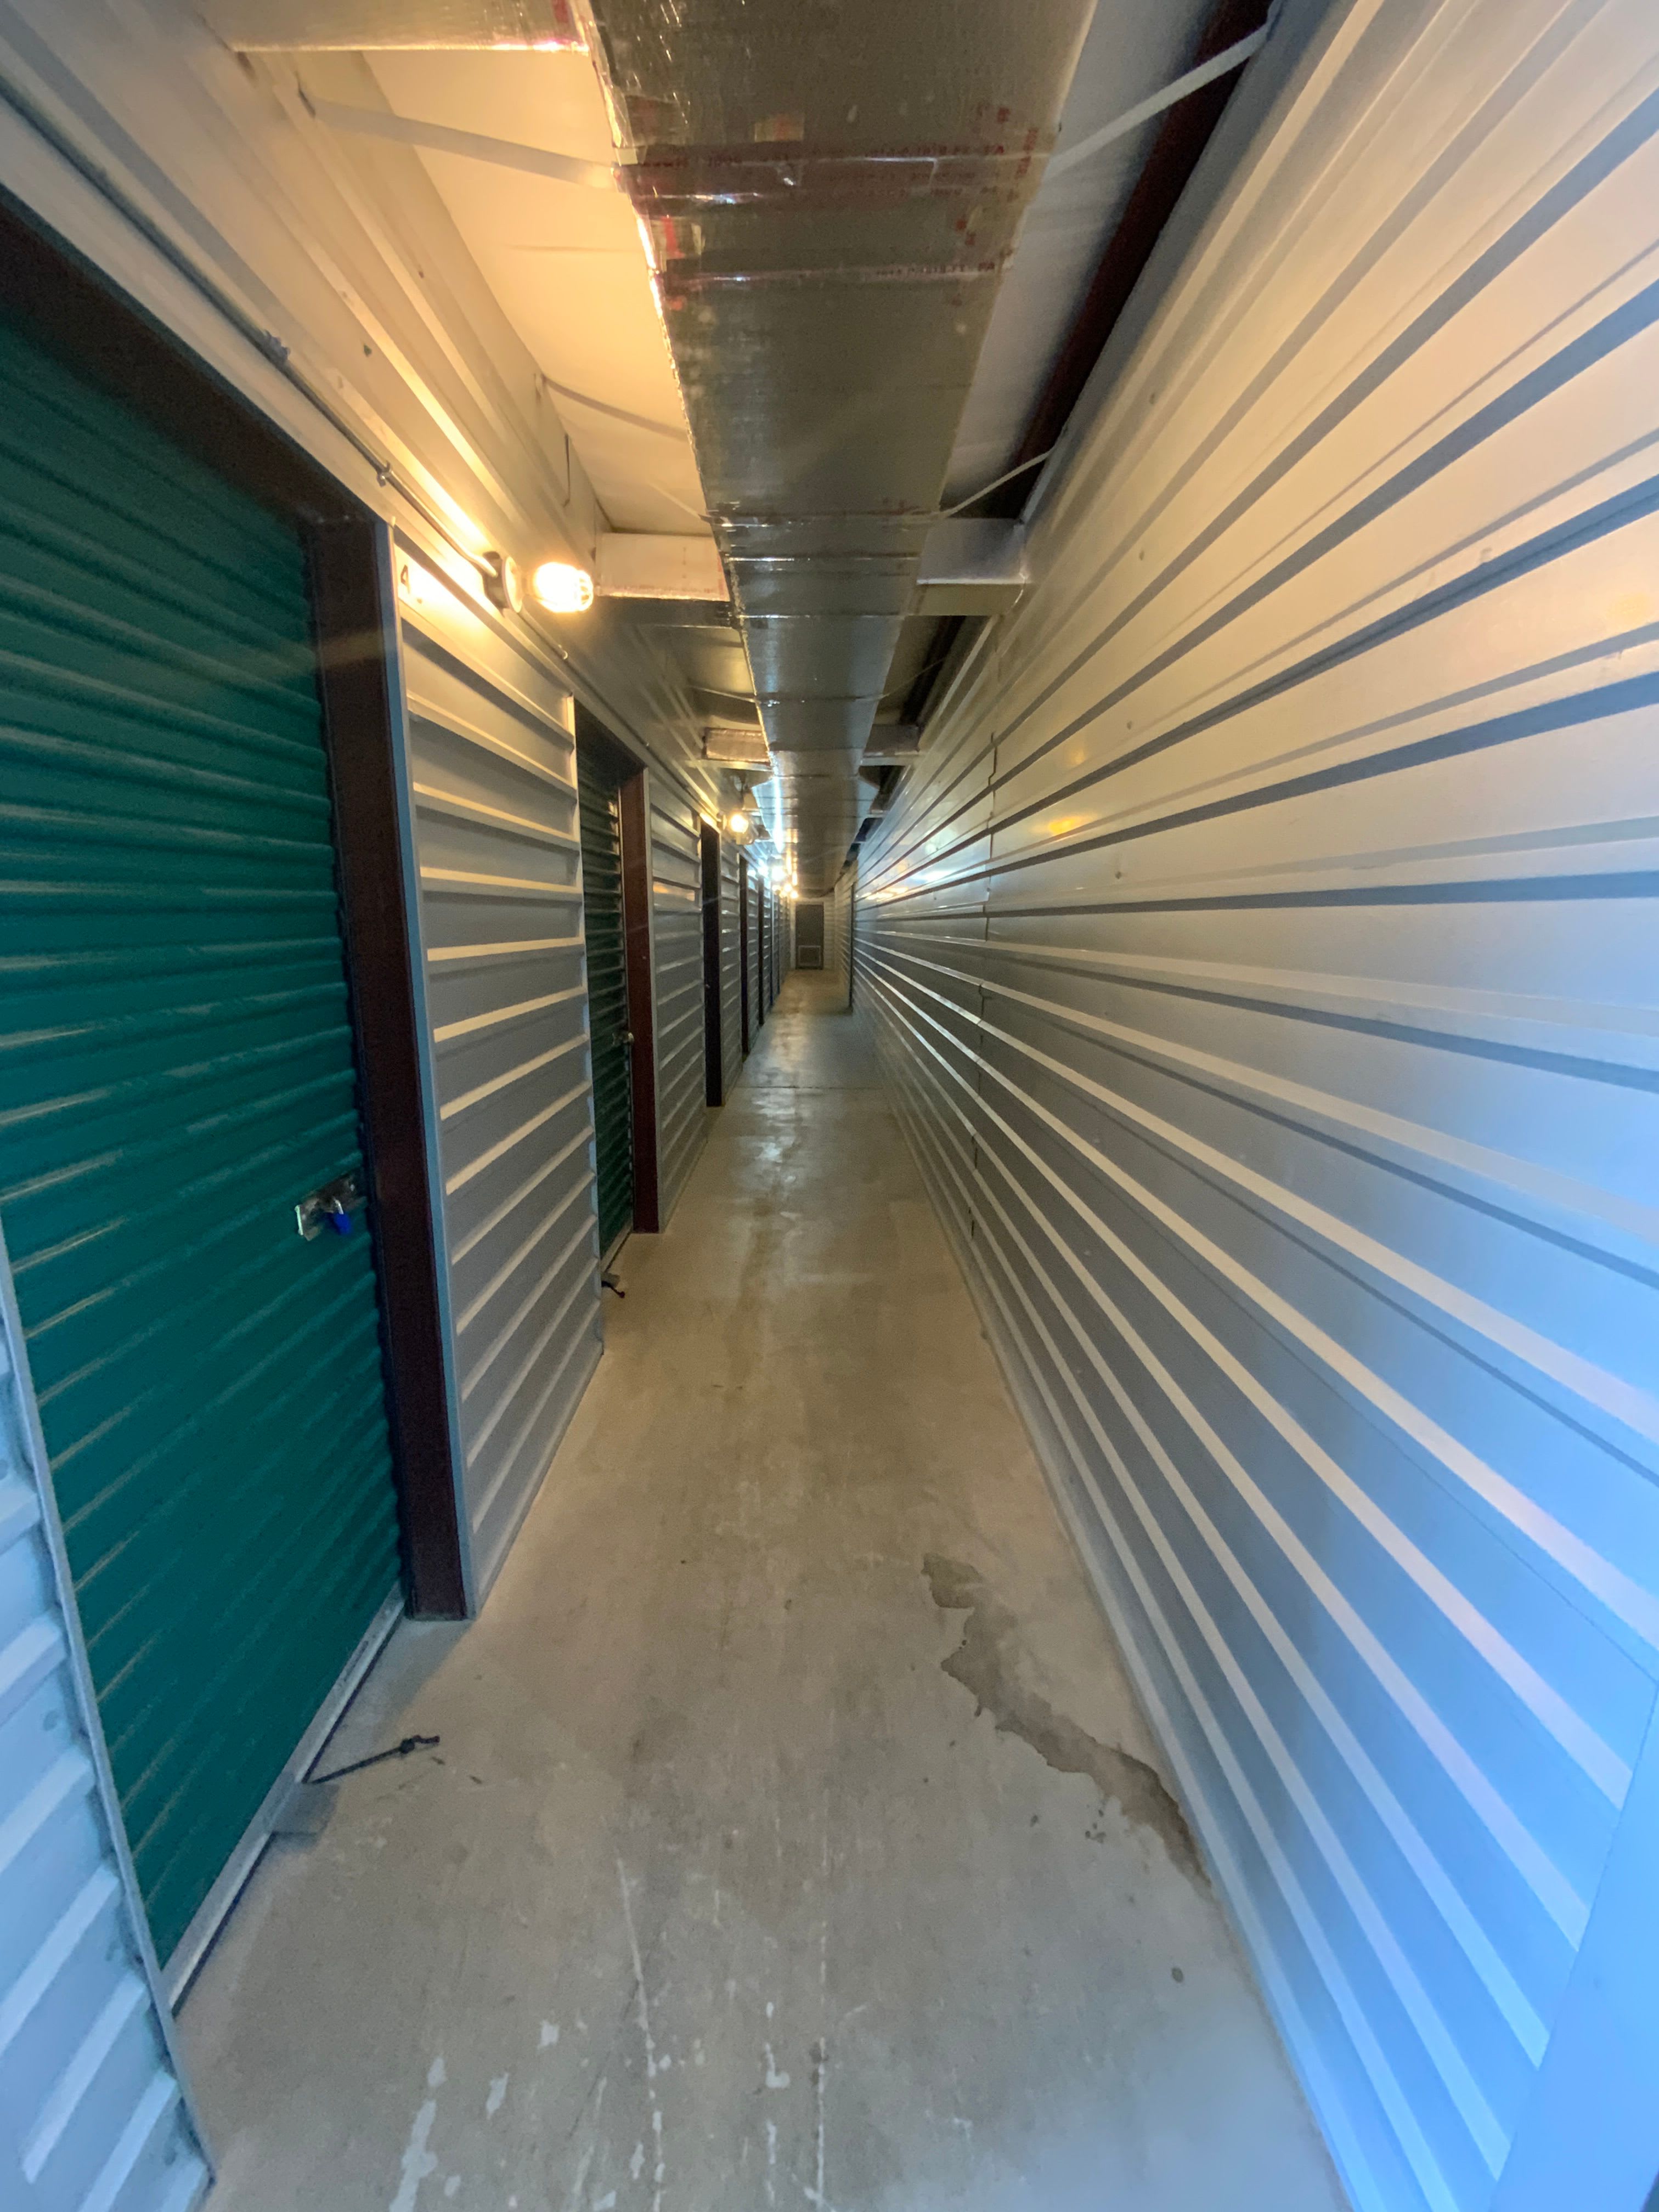 View our features at KO Storage of Harlingen in Harlingen, Texas